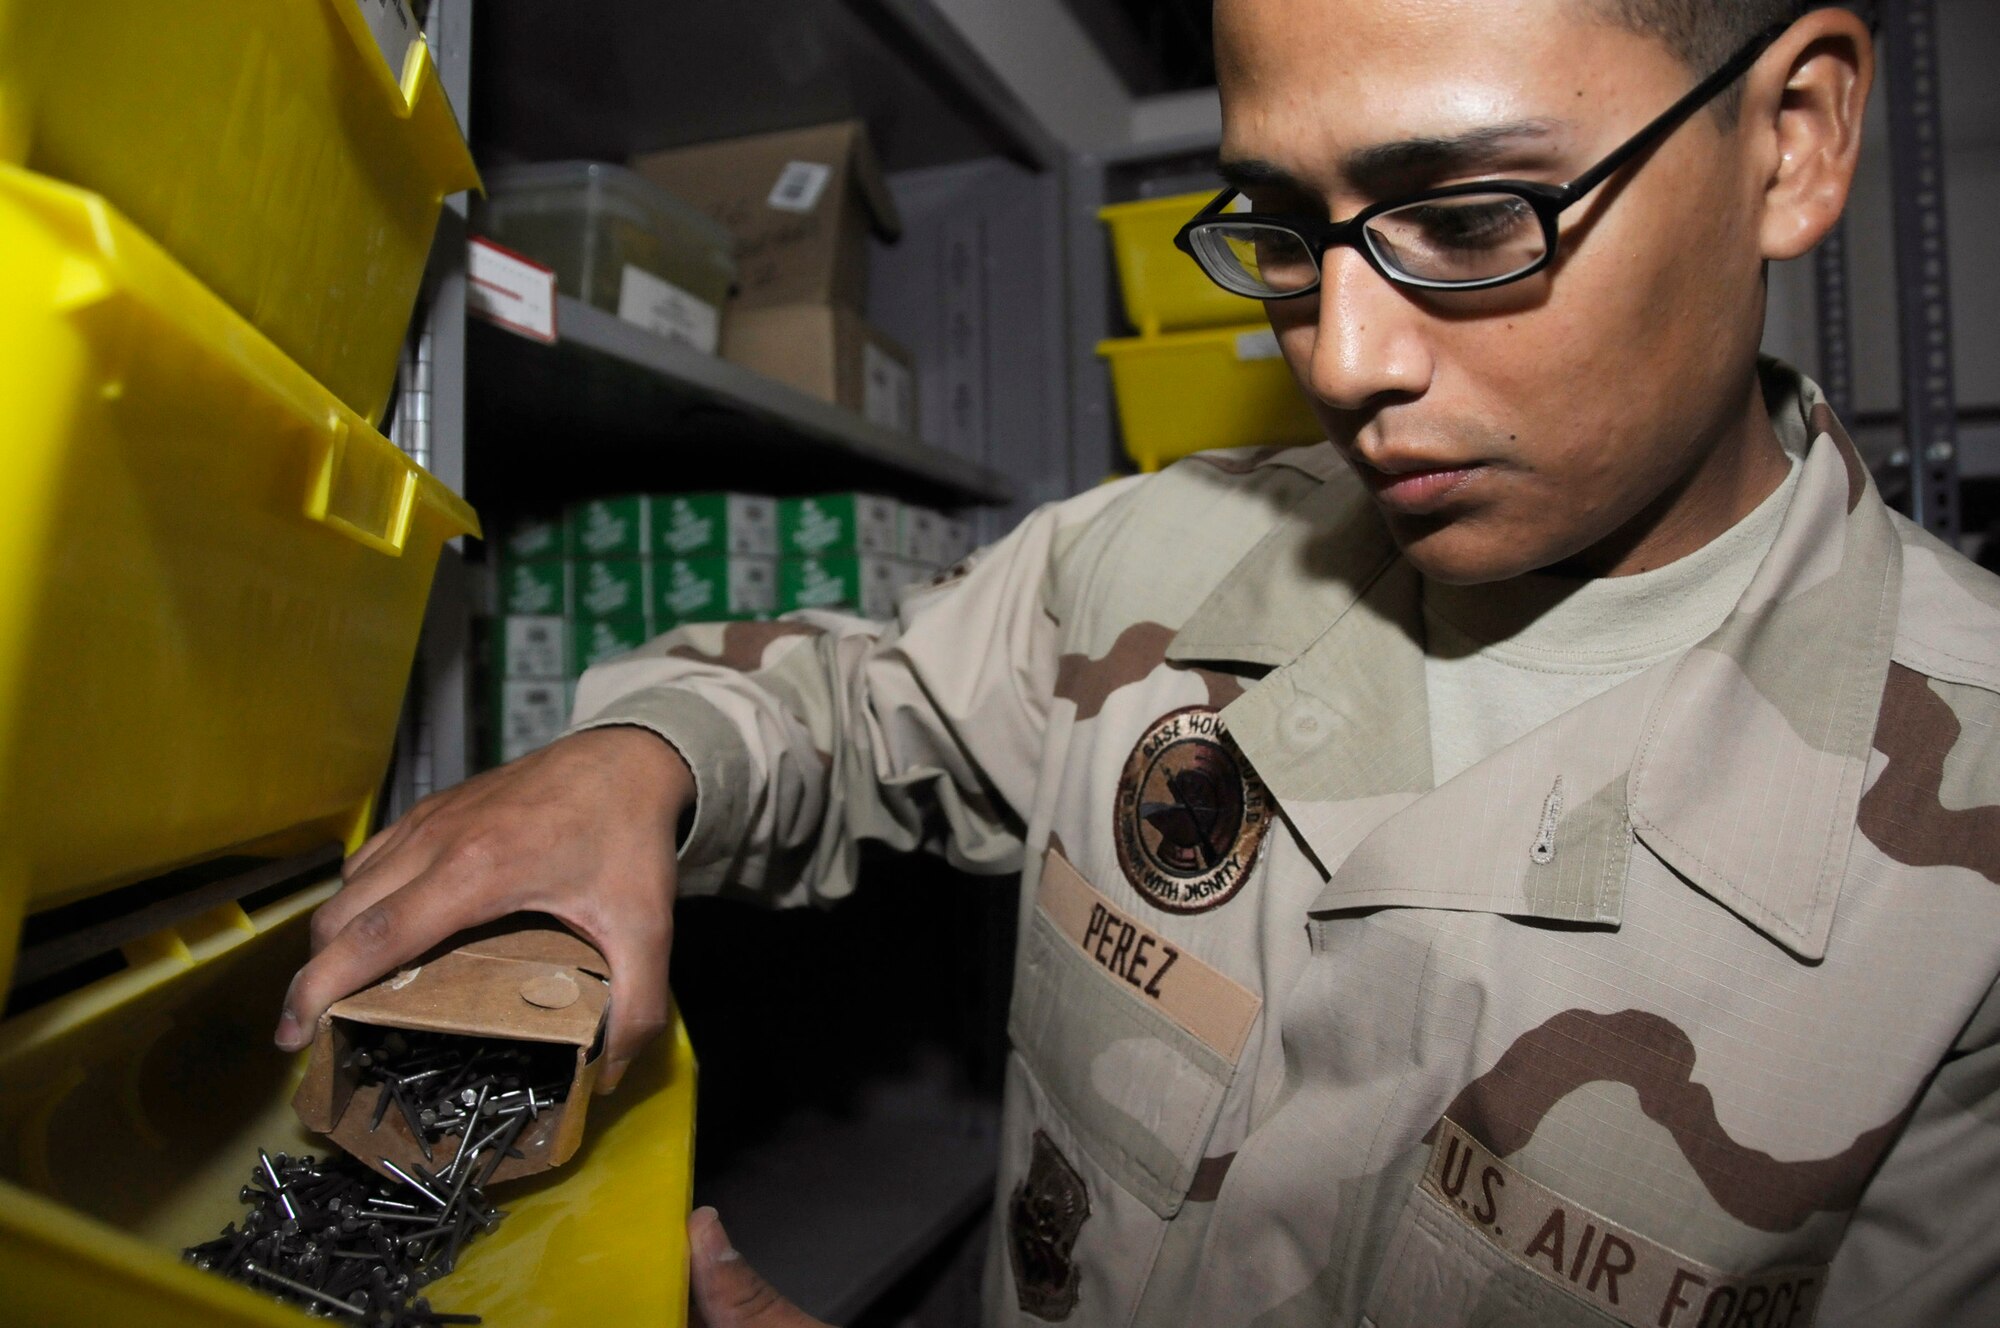 Airman 1st Class Eric Perez, assigned to the 379th Expeditionary Civil Engineer Squadron, restocks finishing nails in the screw and nail area of the base self help store Sept. 4, 2008. Airman Perez and others assigned to the 379th ECES are responsible for providing over 75,000 different building materials and supplies for facility maintenance projects at this undisclosed air base in Southwest Asia. They assist over 1,000 customers per month in support of Operations Iraqi Freedom, Enduring Freedom and Joint Task Force-Horn of Africa. Airman Perez, a native of Houston, Texas, is deployed from Eielson Air Force Base, Alaska. (U.S. Air Force photo by Staff Sgt. Darnell T. Cannady)